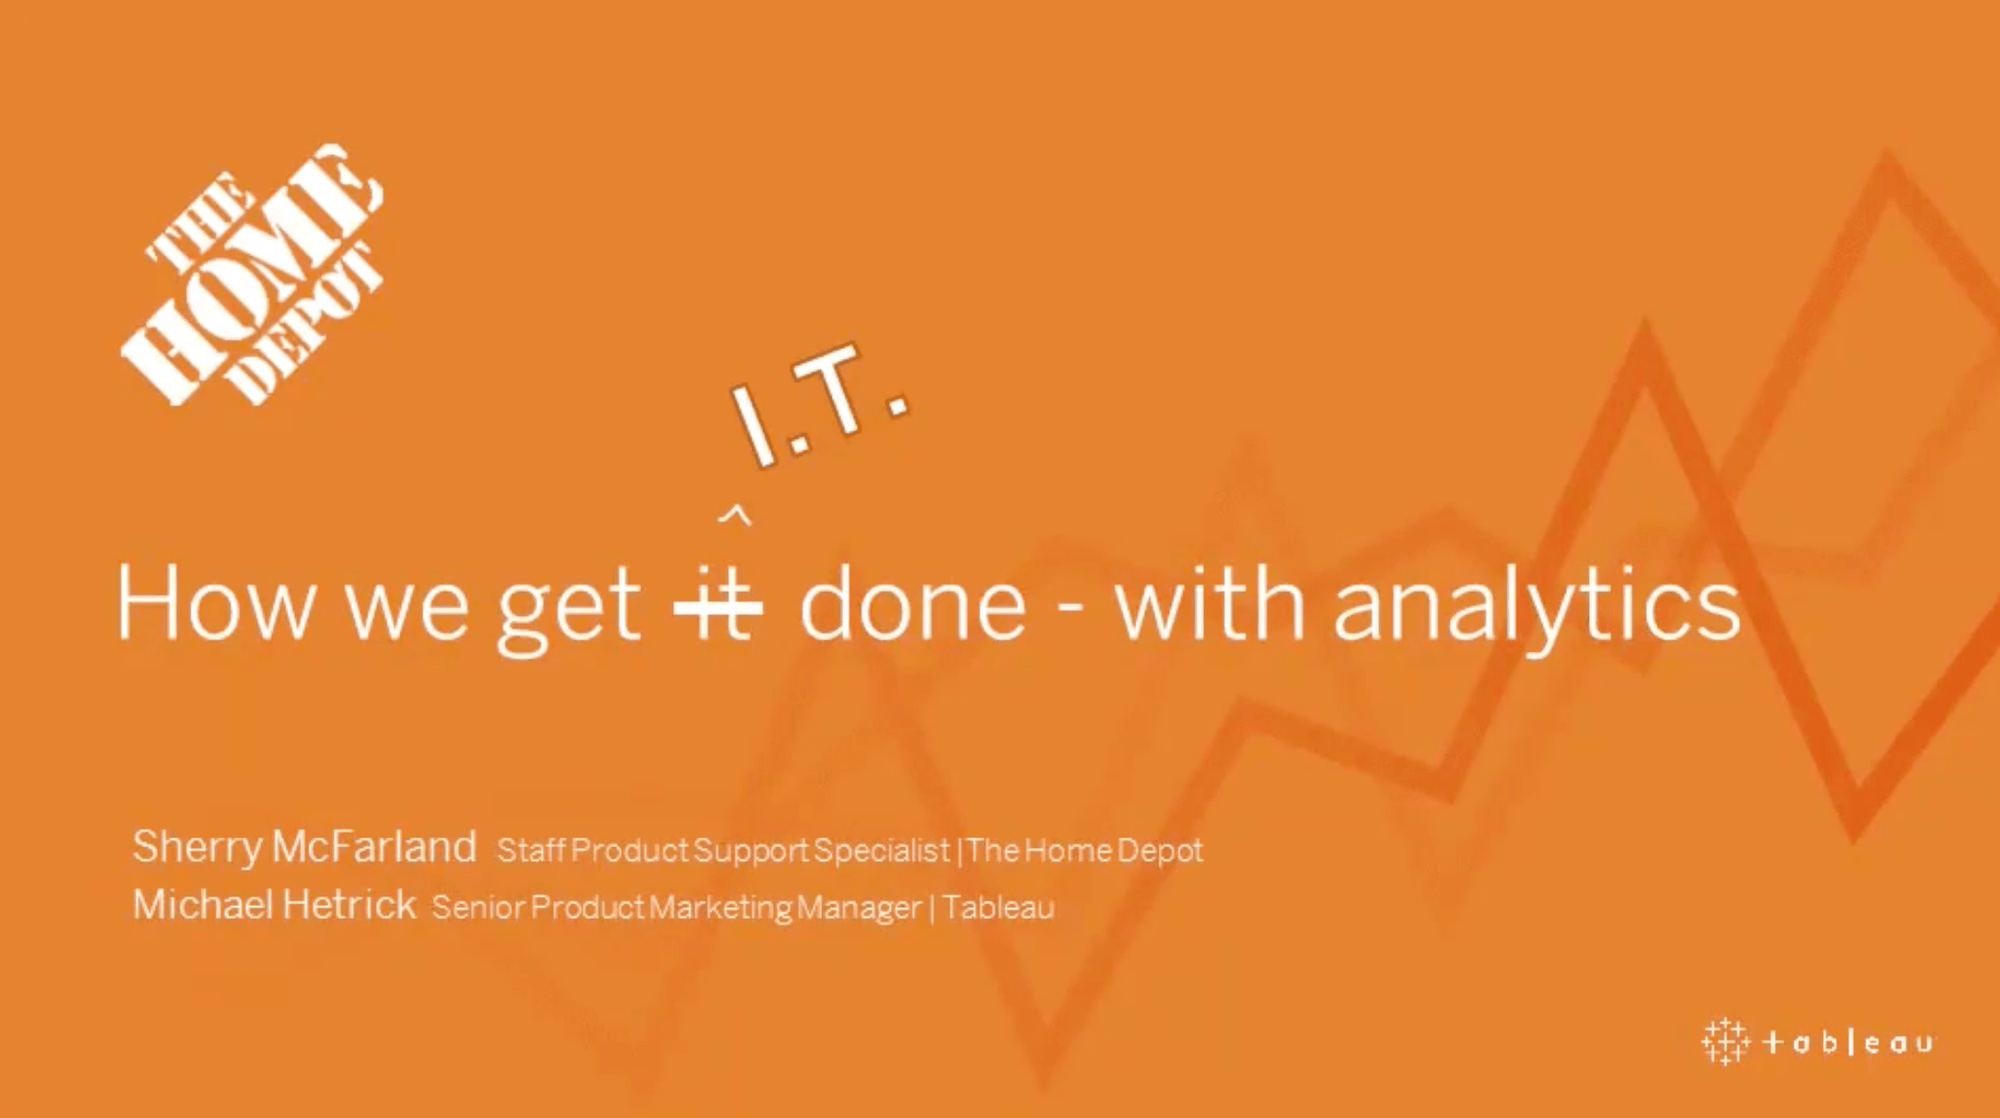 Navigate to The Home Depot: How we get IT done – with analytics